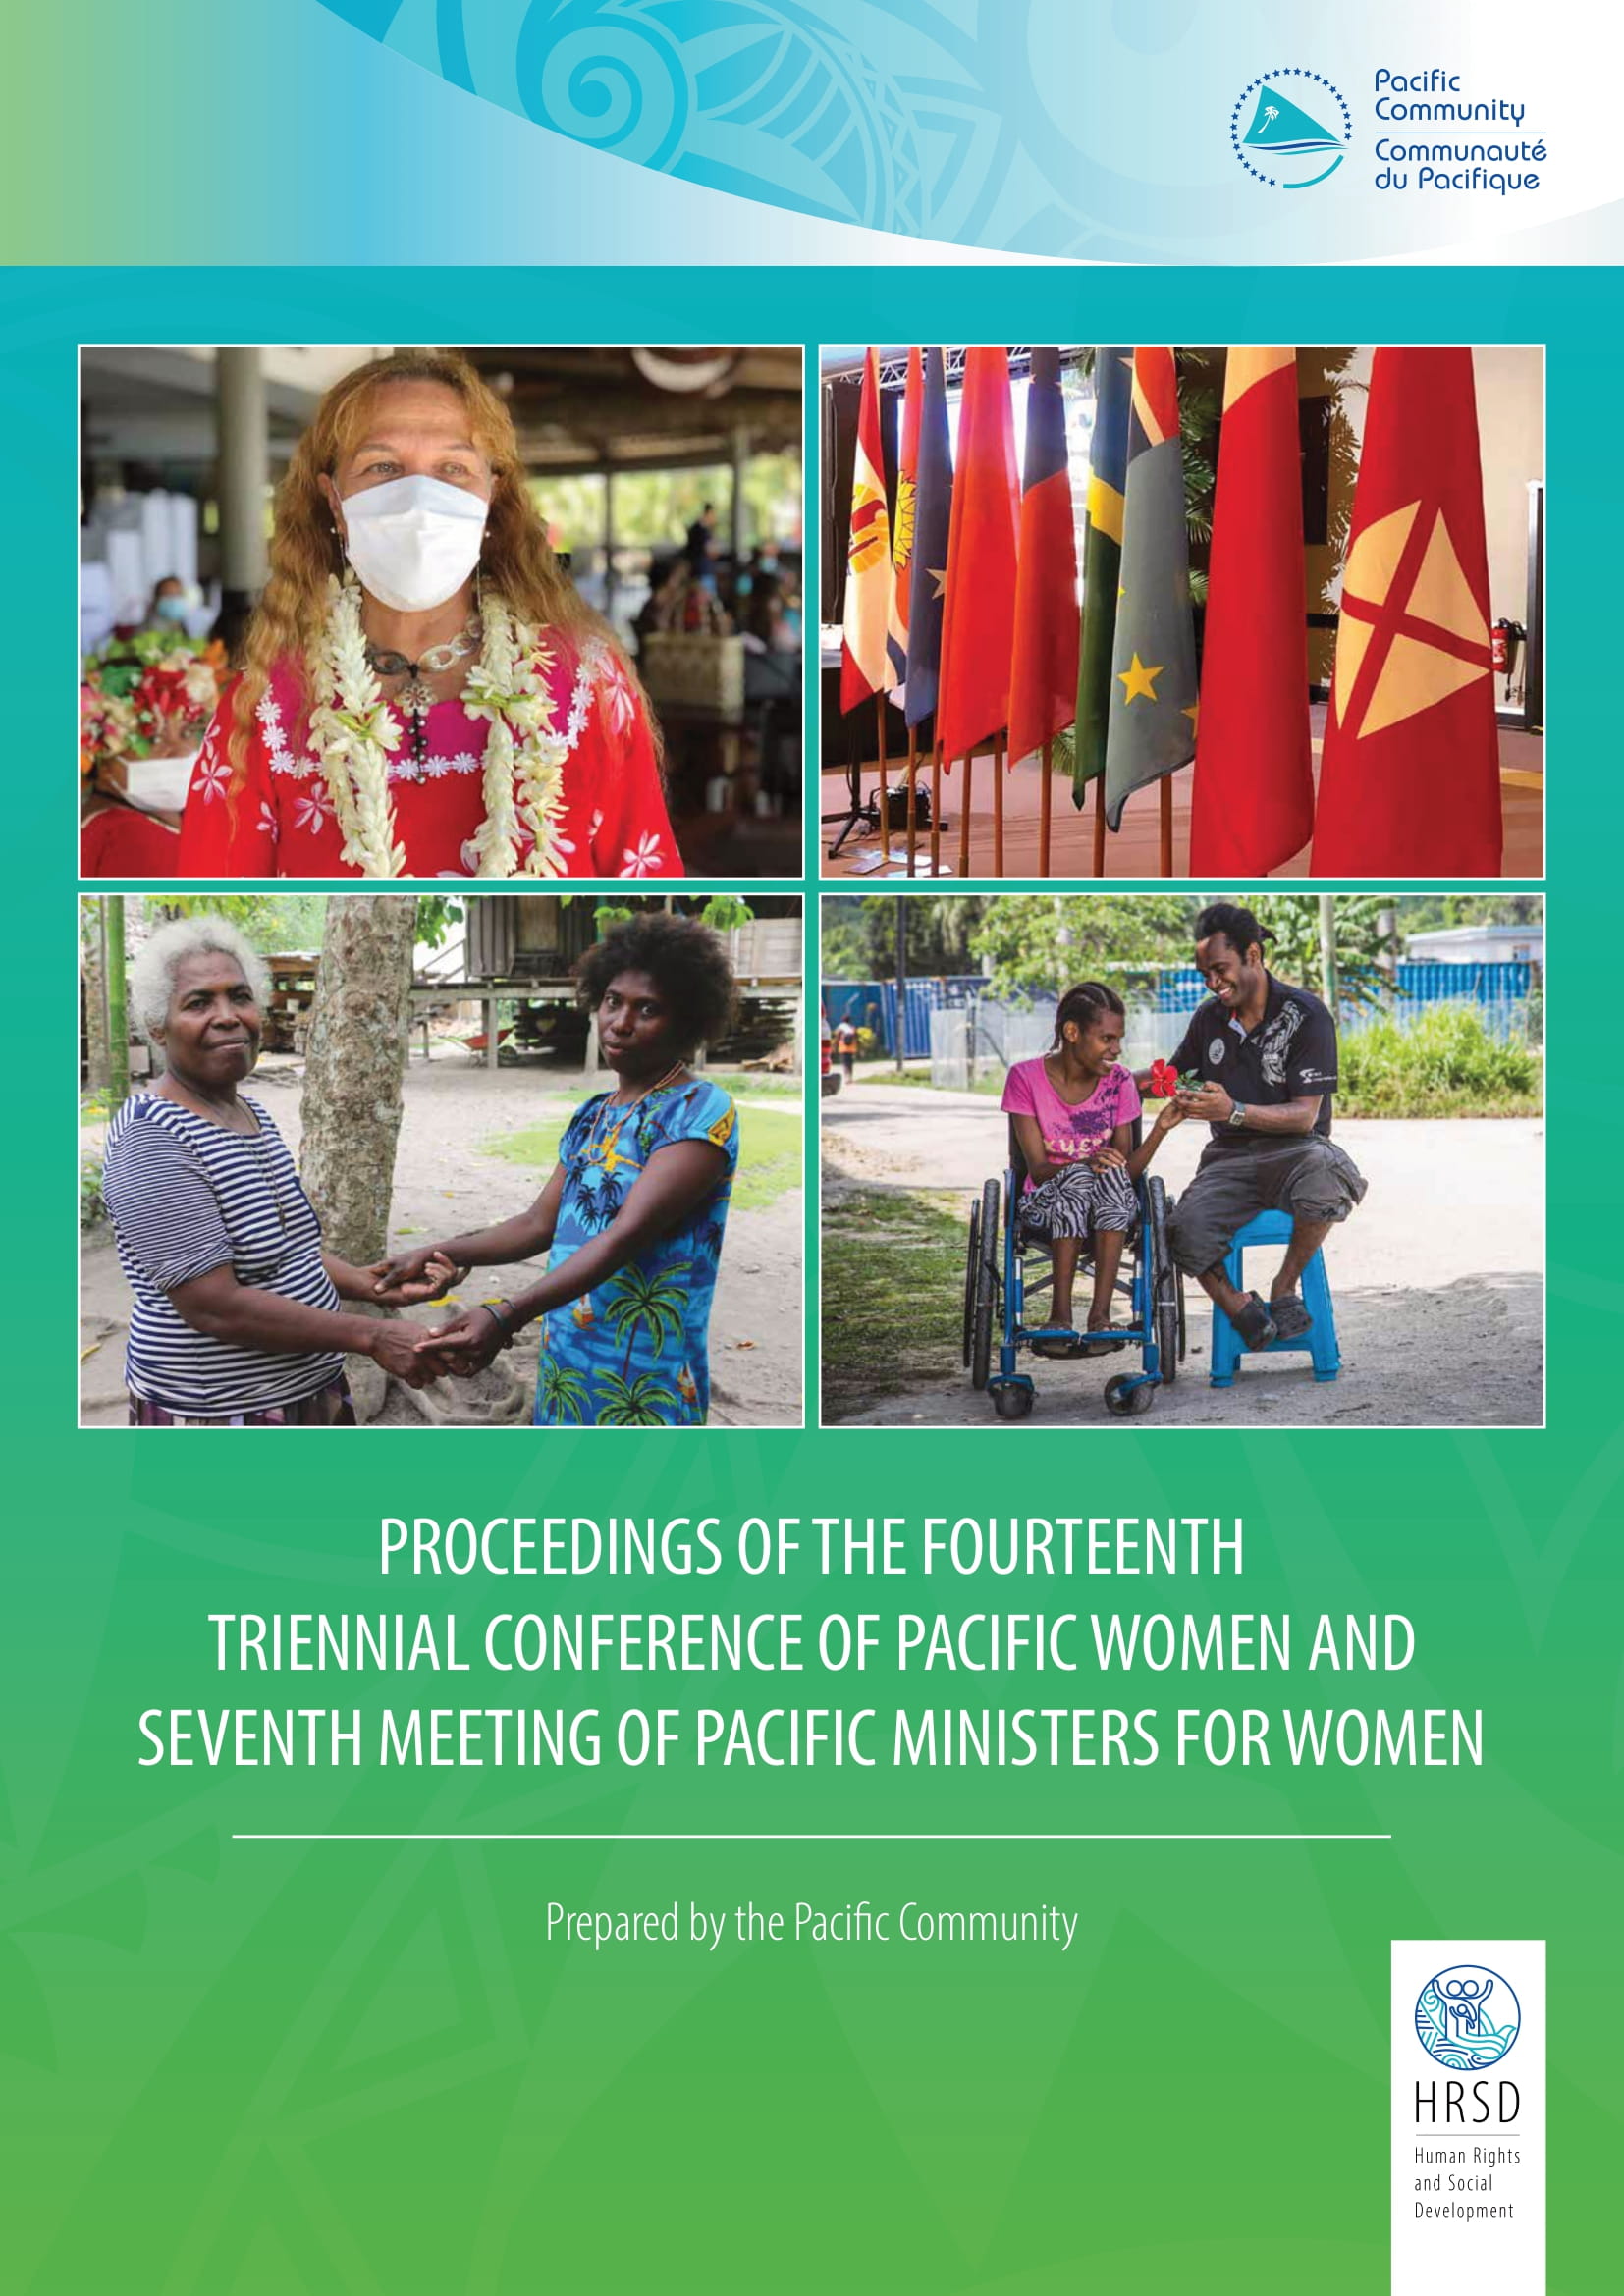 2021-10/Proceedings_of_the_14th_triennial_conference_of_pacific_women_and_7th_meeting_of_pacific_ministers_for_women-1 (1)-1_0.jpg